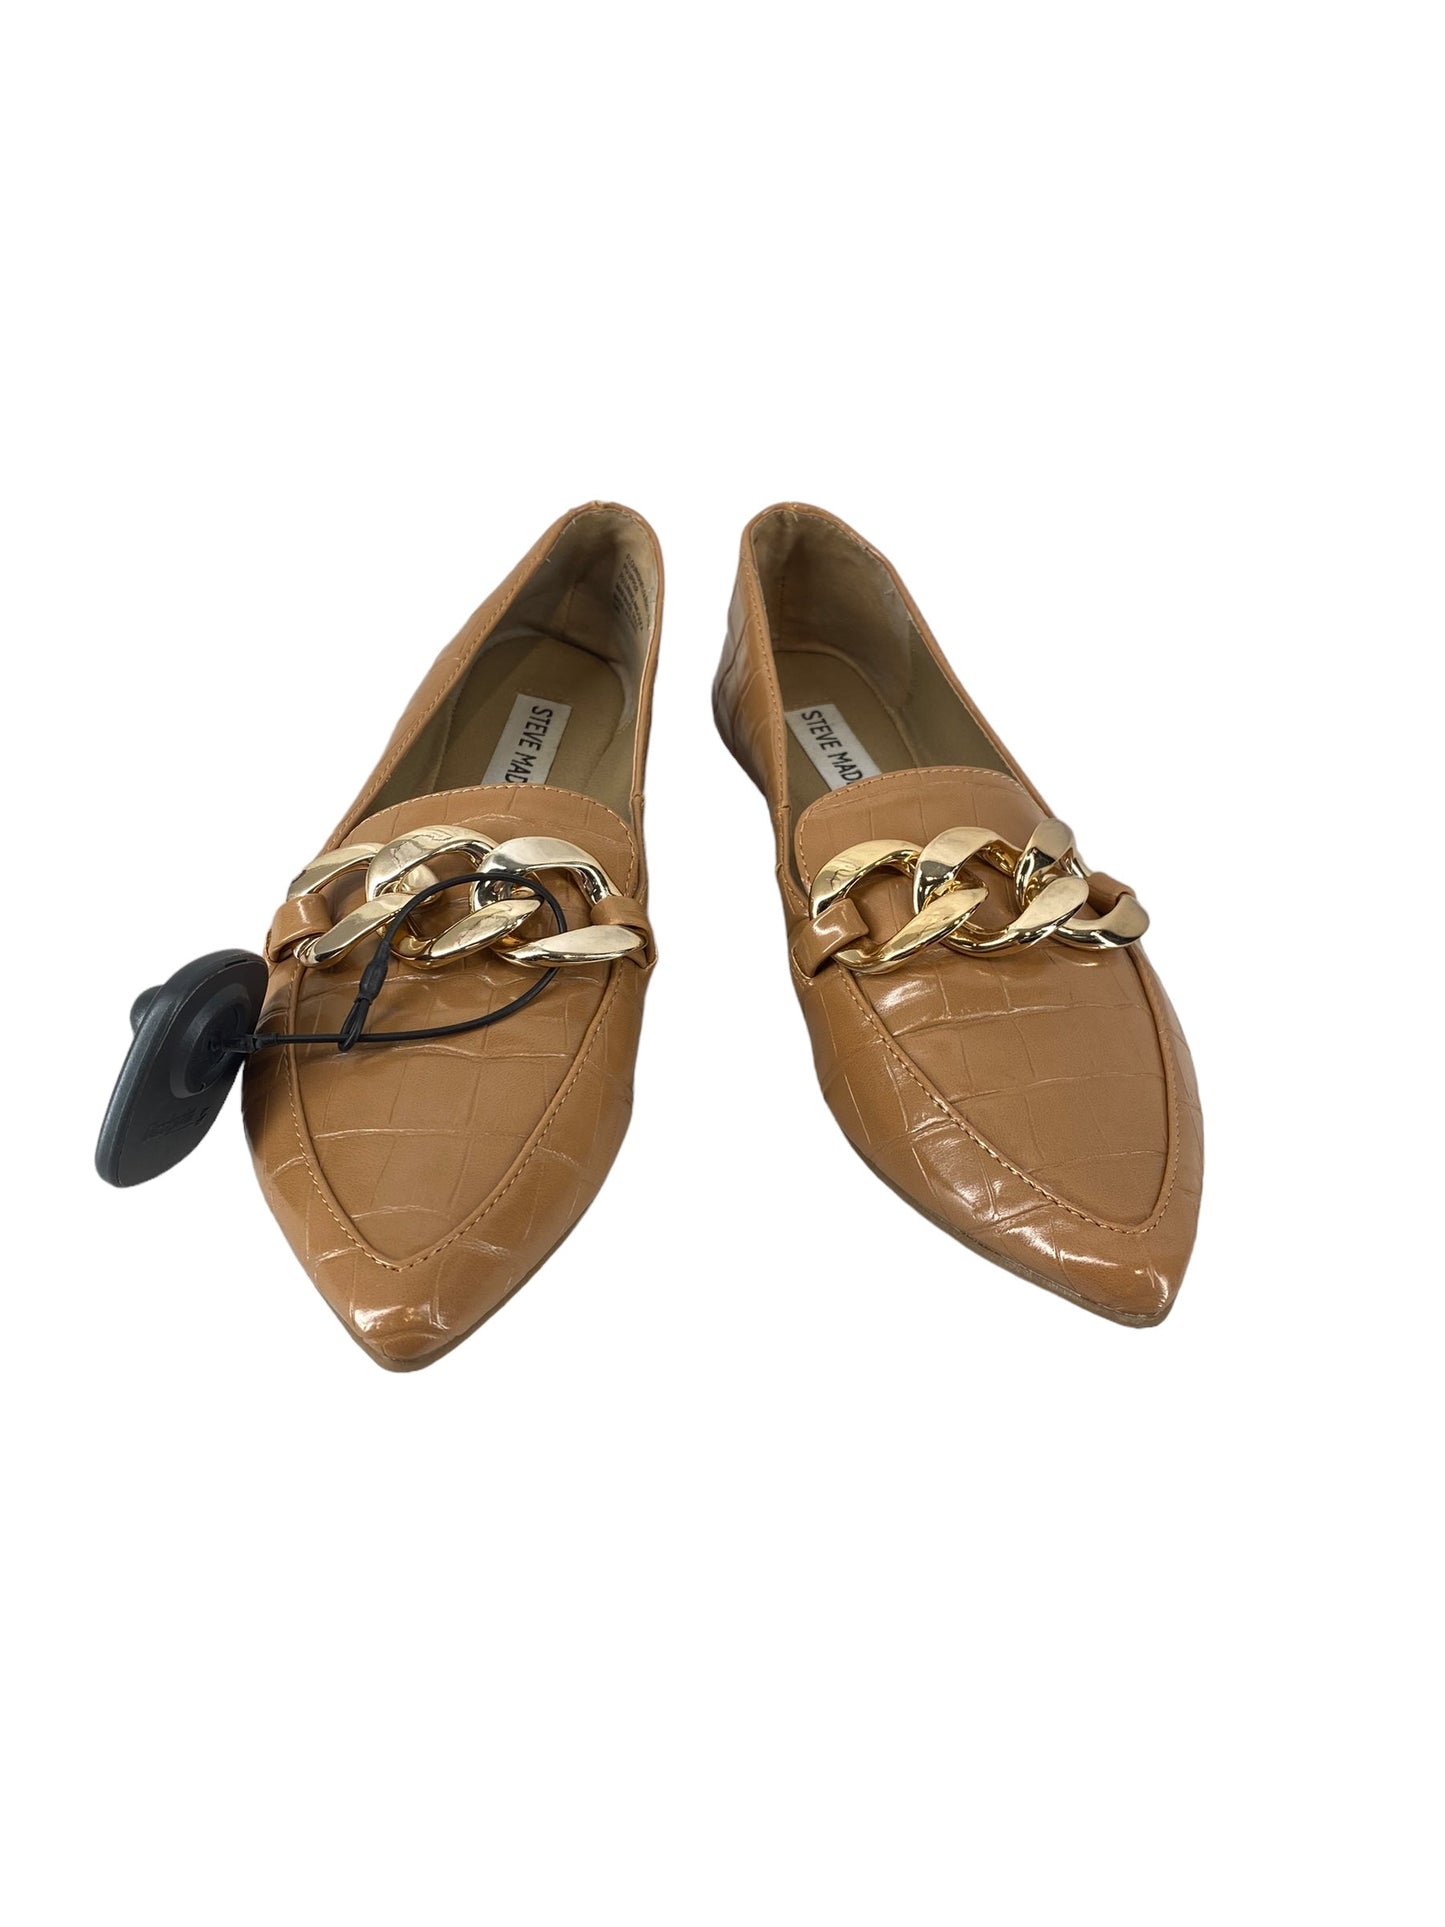 Brown Shoes Flats Steve Madden, Size 6.5